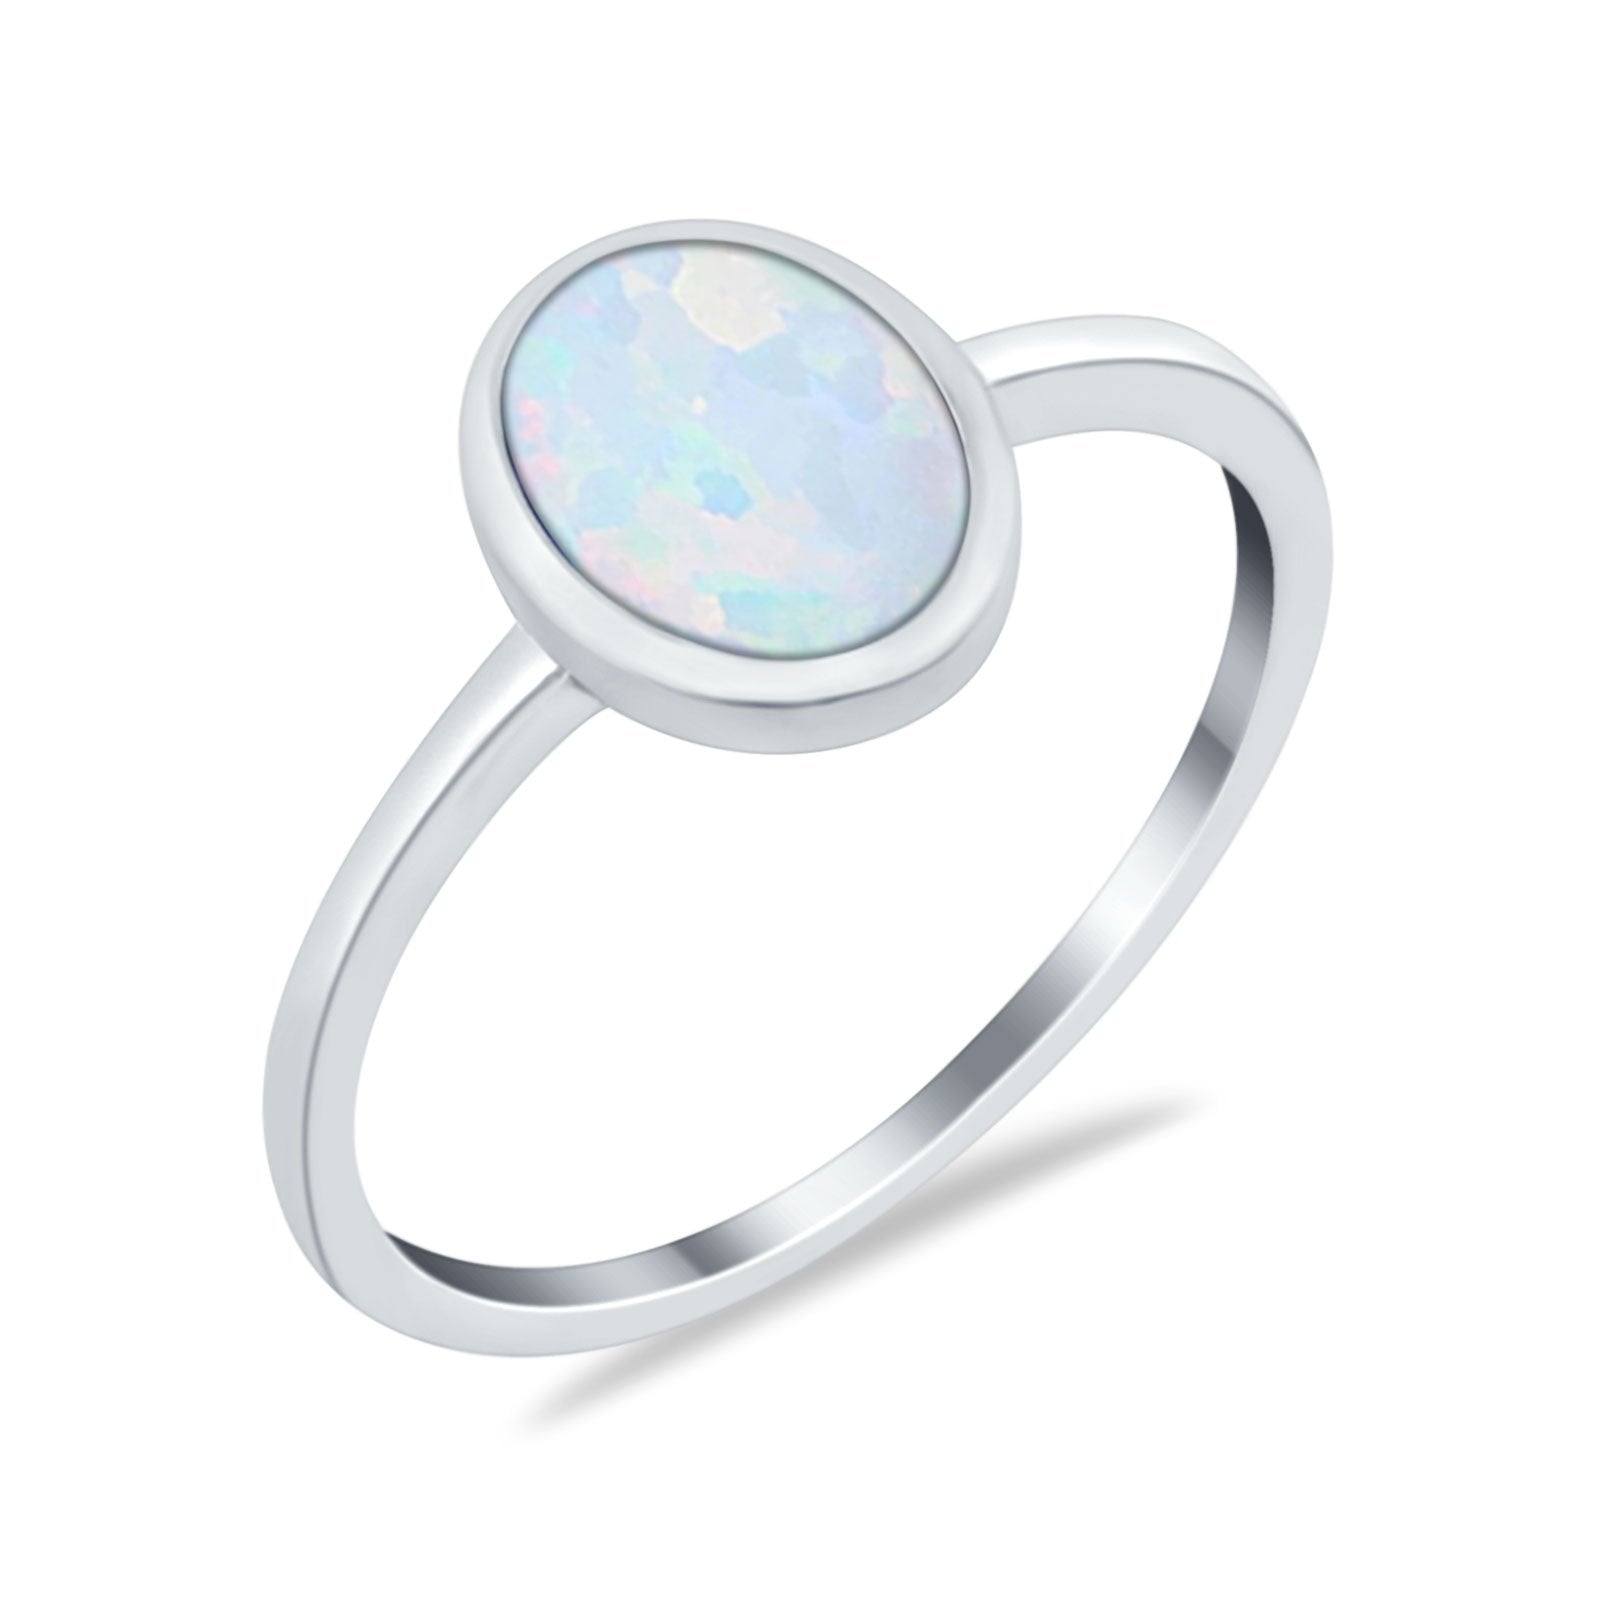 Solitaire Oval Thumb Ring Lab Created White Opal Stone 925 Sterling Silver